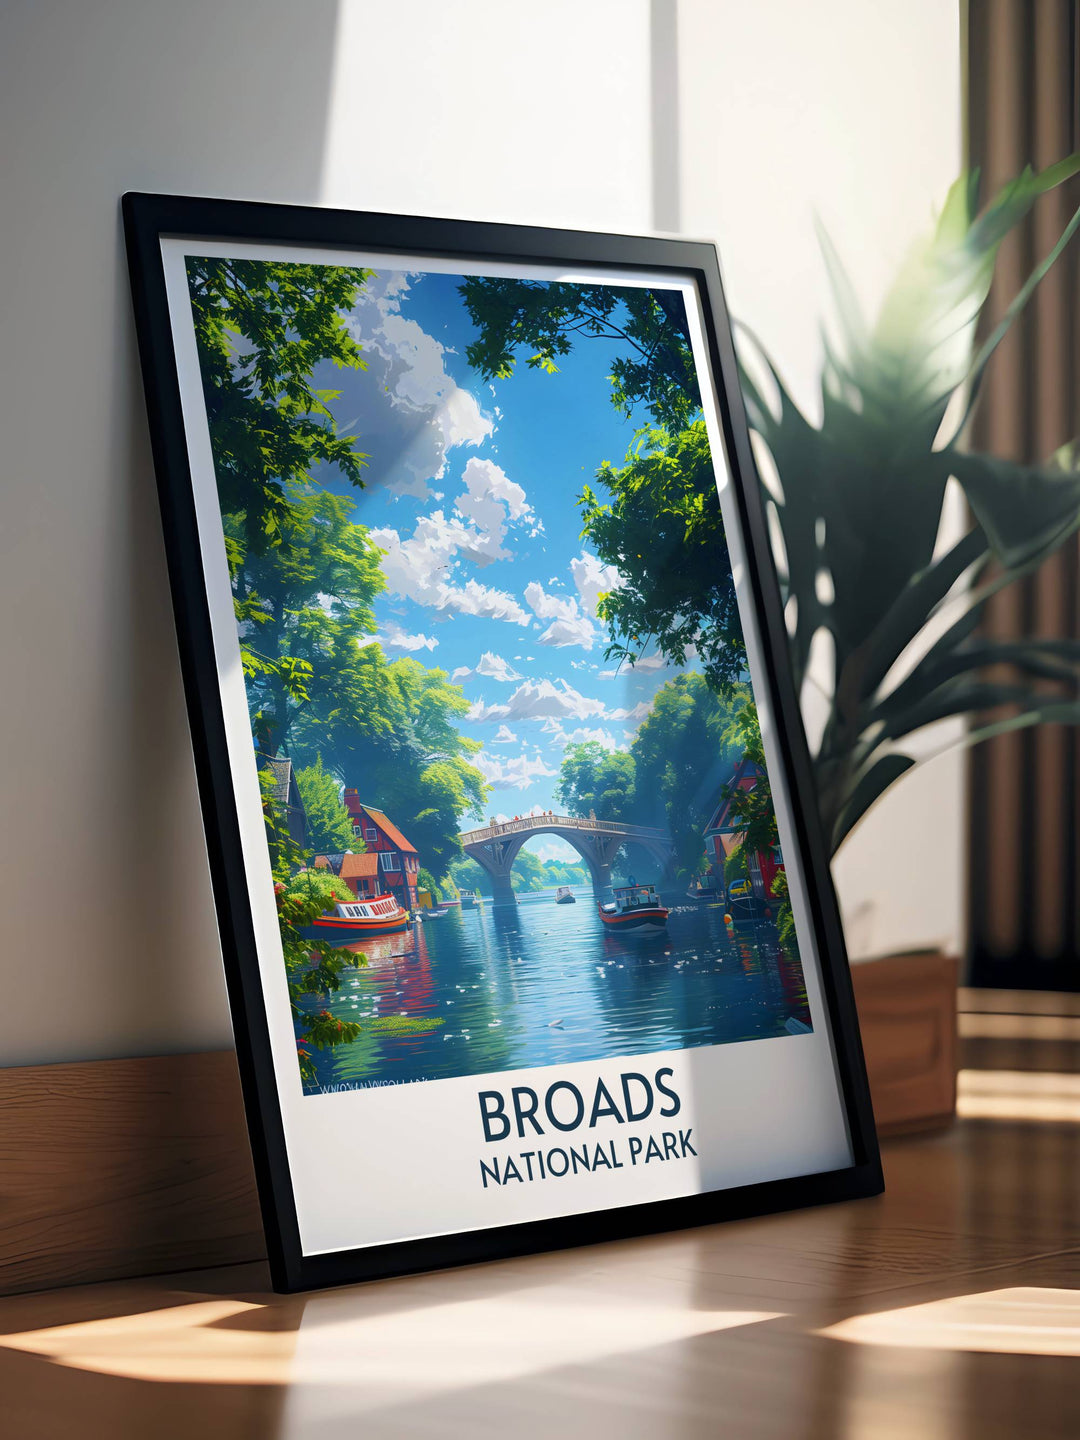 Transform your space with a Wroxham Bridge Digital Print. This piece of art beautifully depicts the Norfolk Broads, offering a serene and picturesque view that complements any decor style and celebrates the UKs natural landscapes.